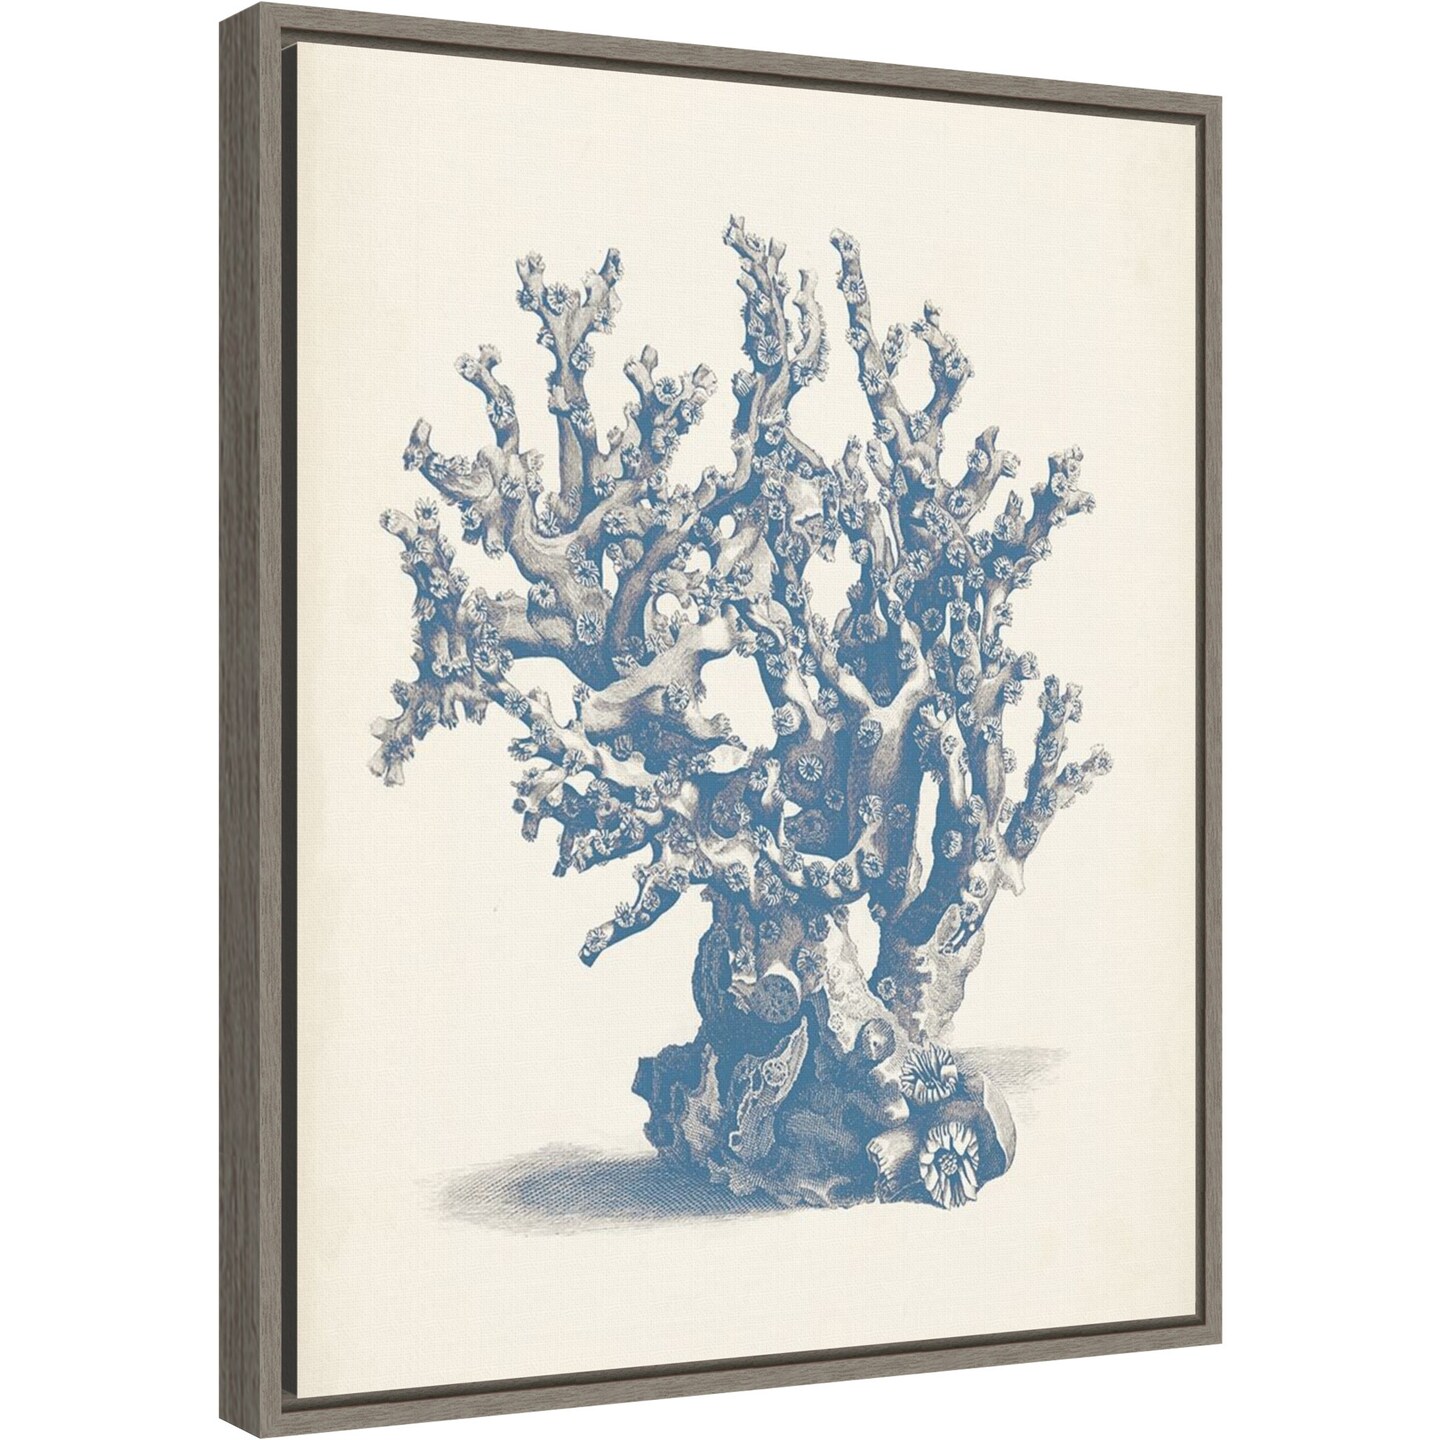 Antique Coral Collection V by Vision Studio 16-in. W x 20-in. H. Canvas Wall Art Print Framed in Grey